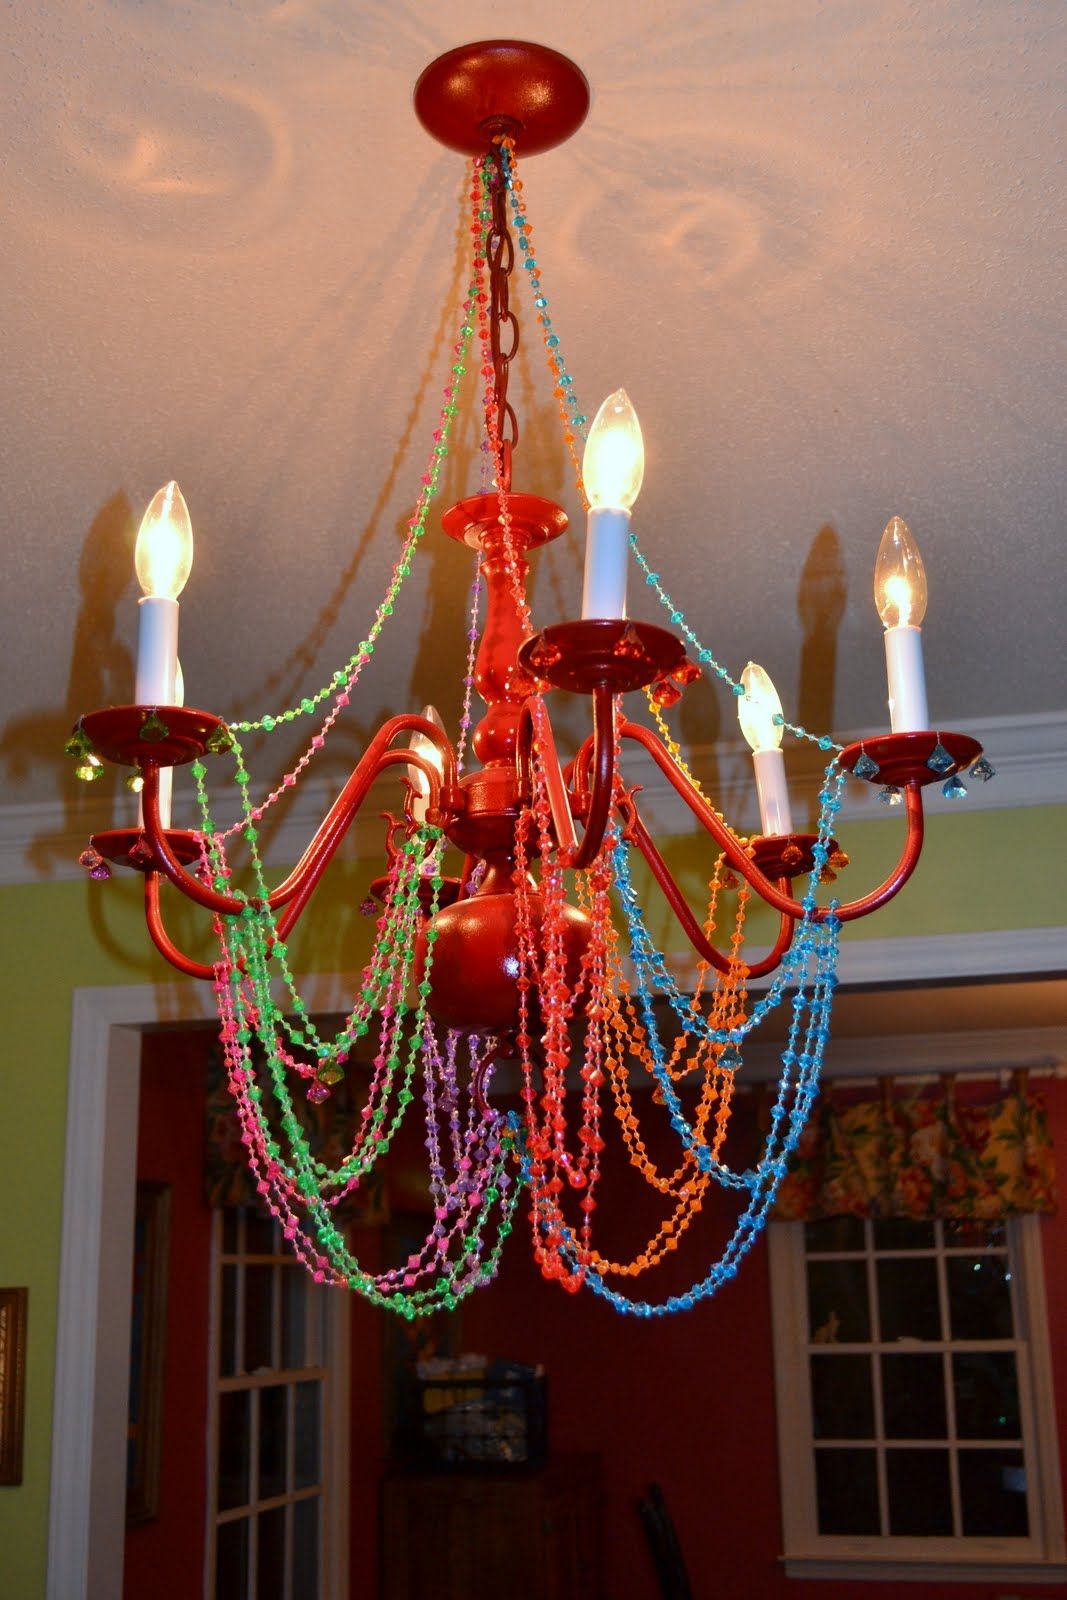 Chandelier Interesting Colorful Chandelier Colored Crystal Regarding Multi Colored Gypsy Chandeliers (View 17 of 25)